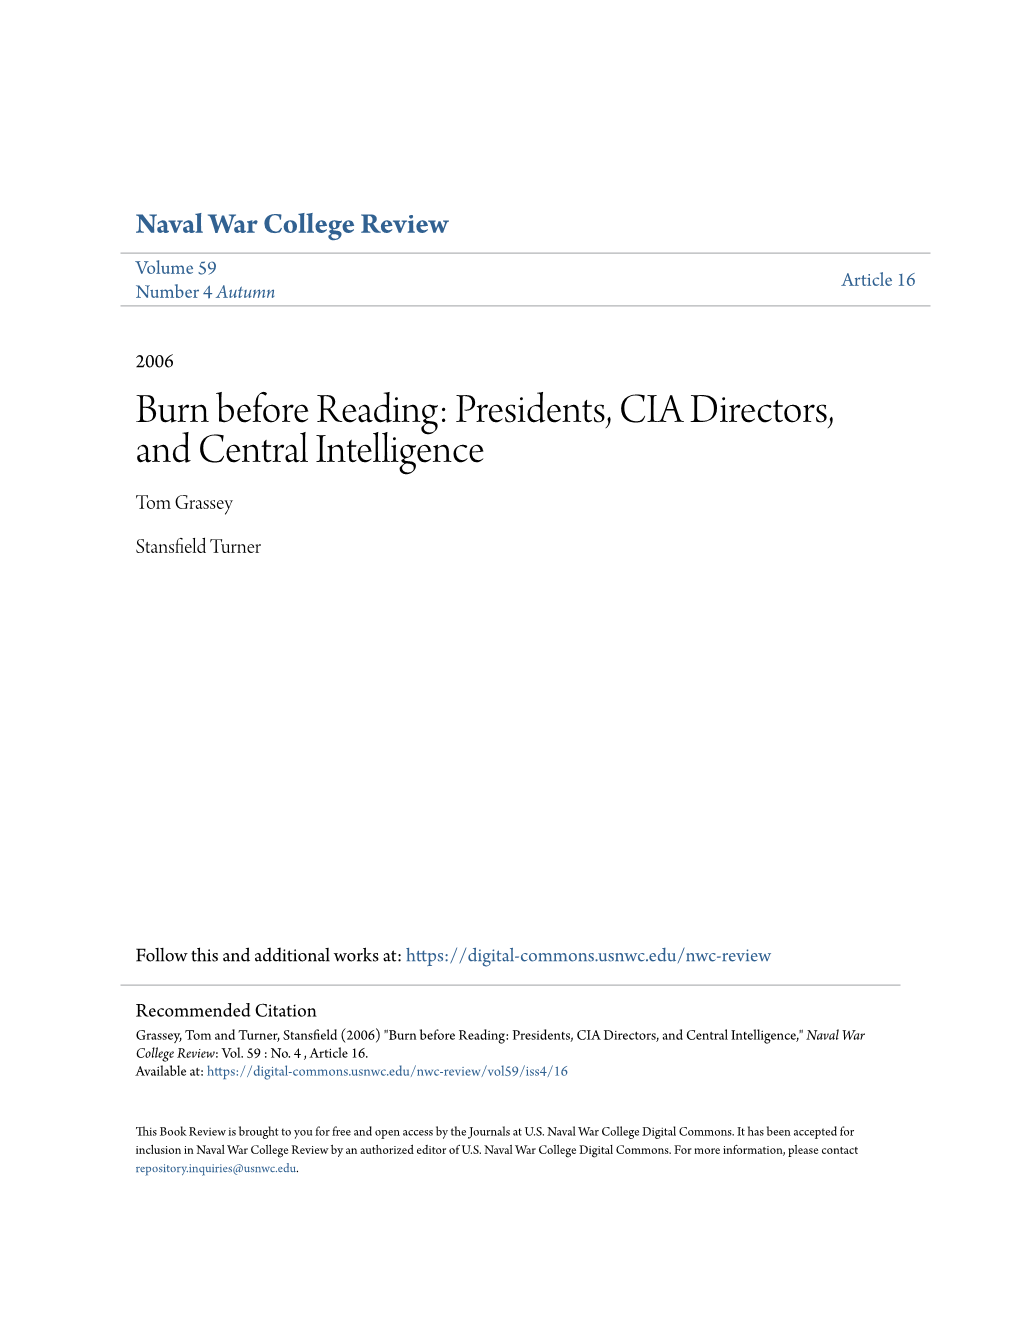 Burn Before Reading: Presidents, CIA Directors, and Central Intelligence Tom Grassey